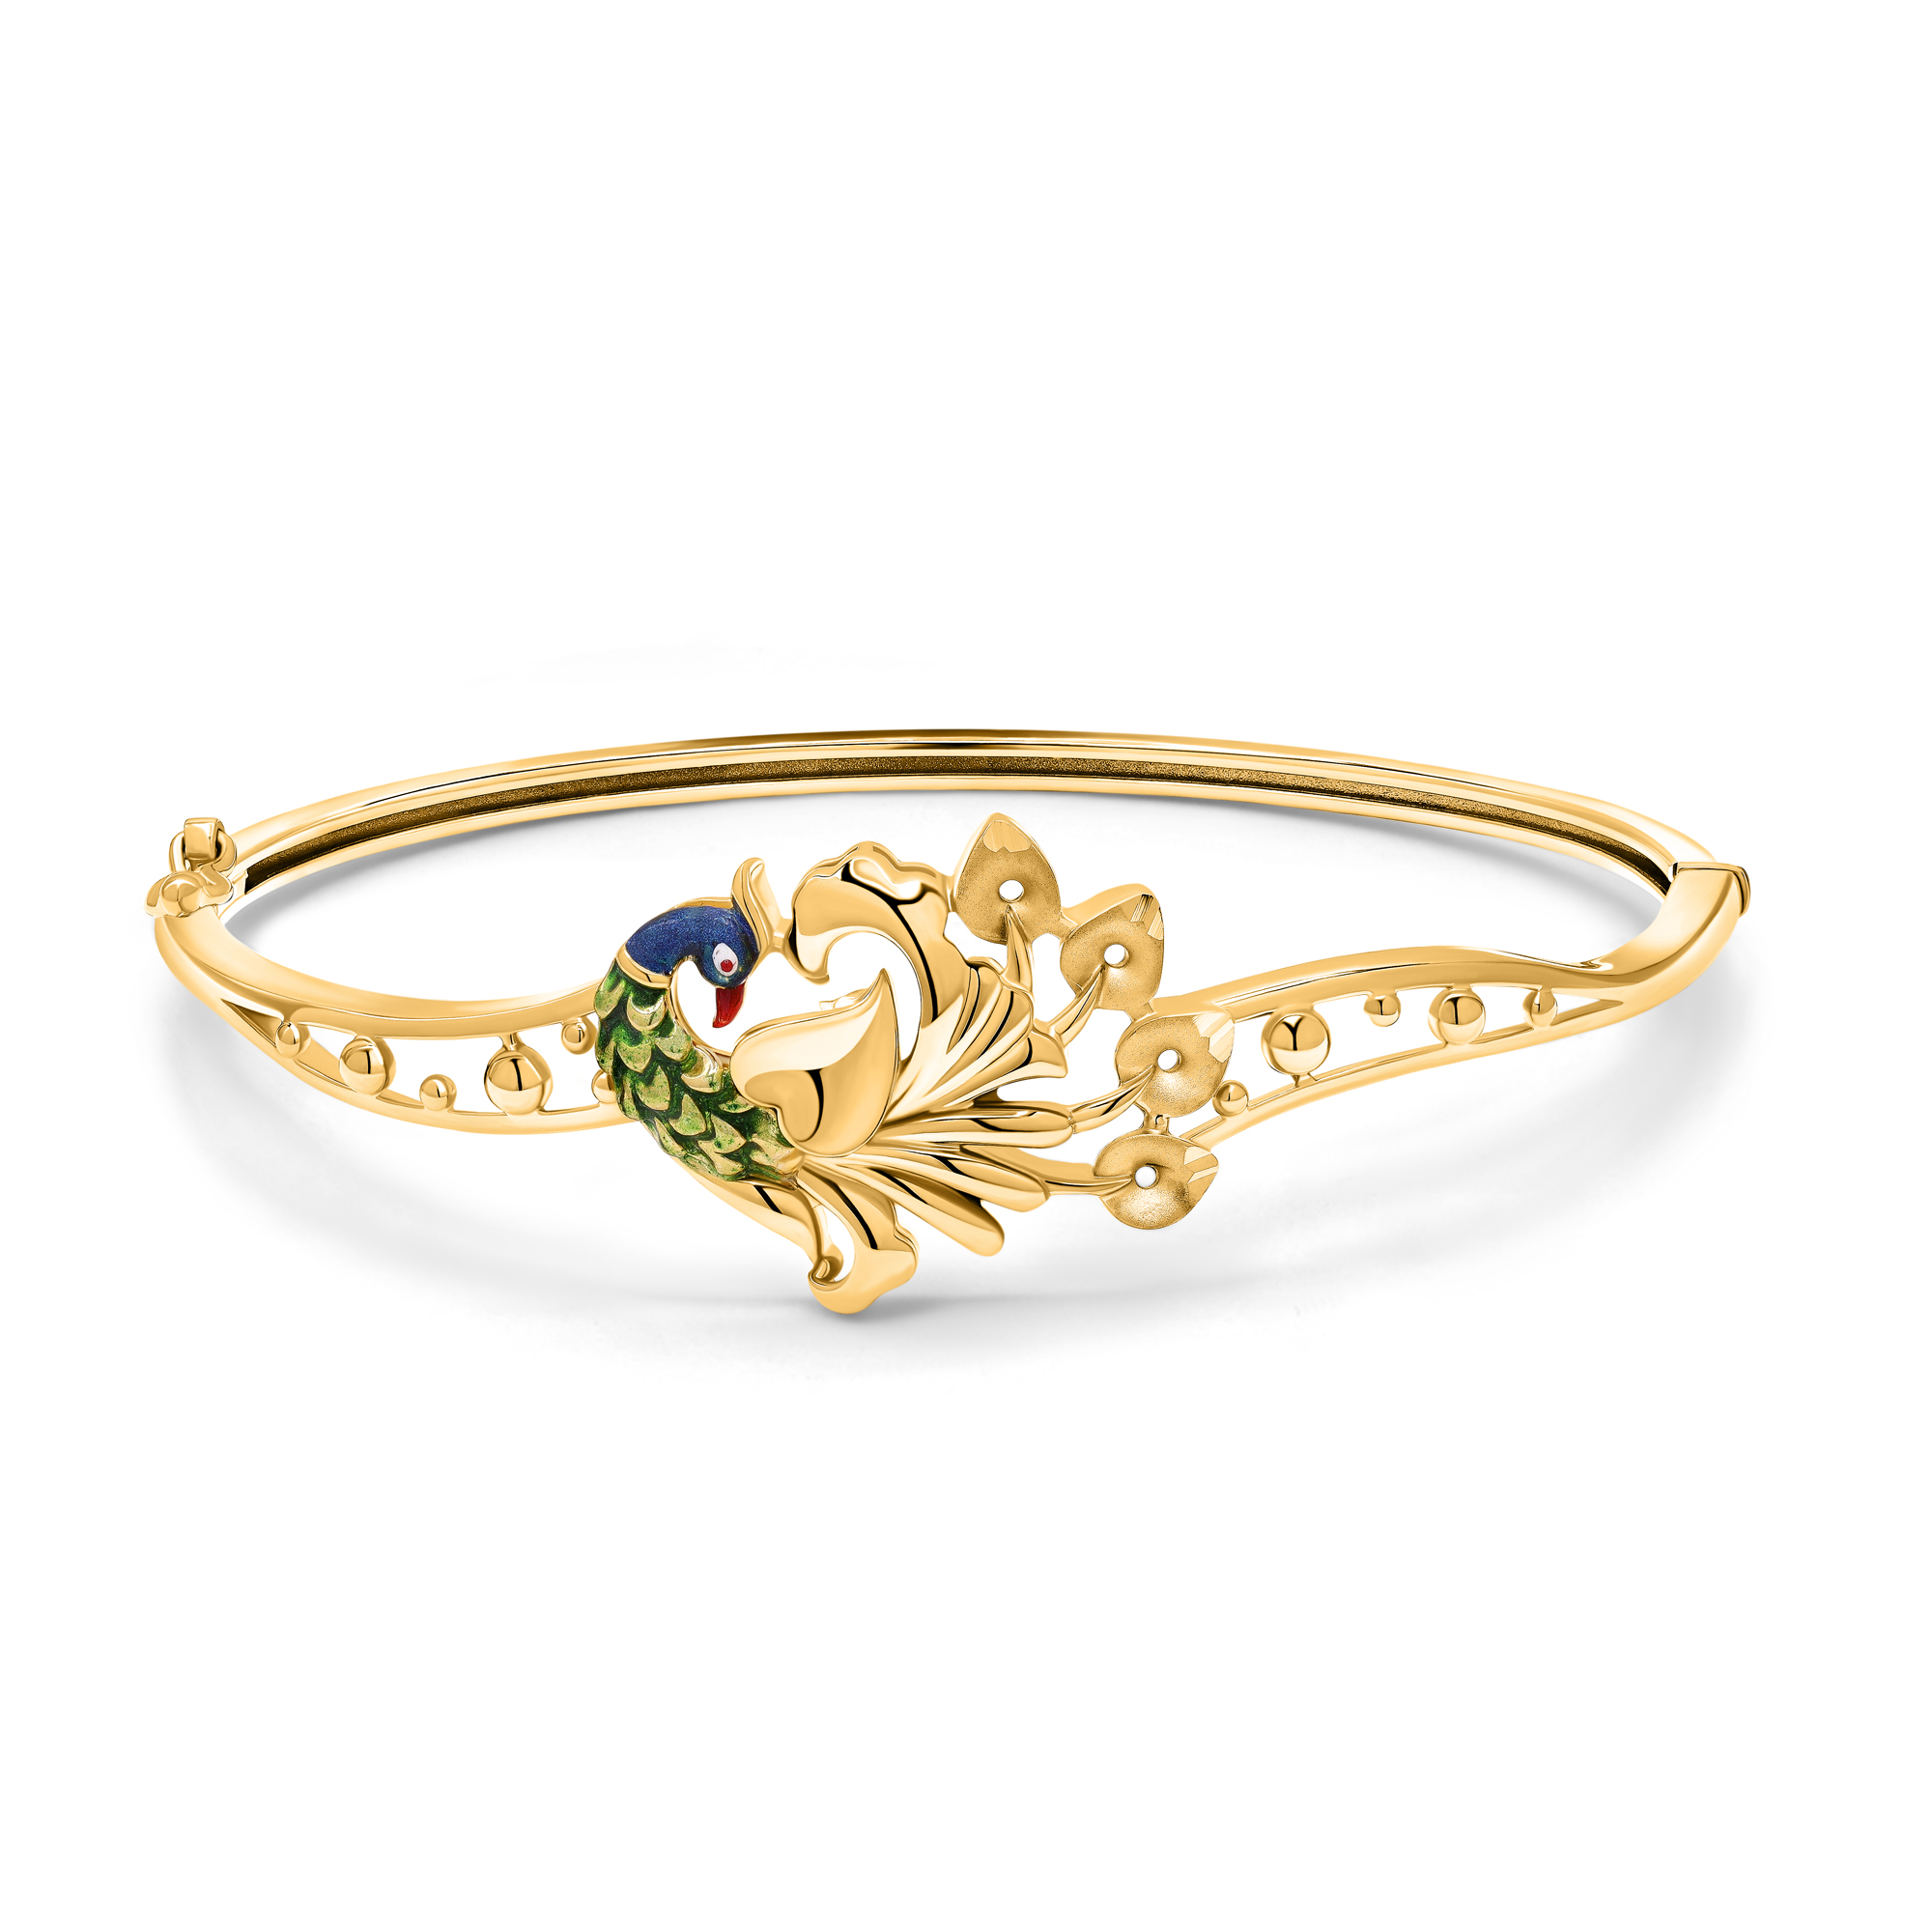 Round Party Peacock Design Gold Bangle